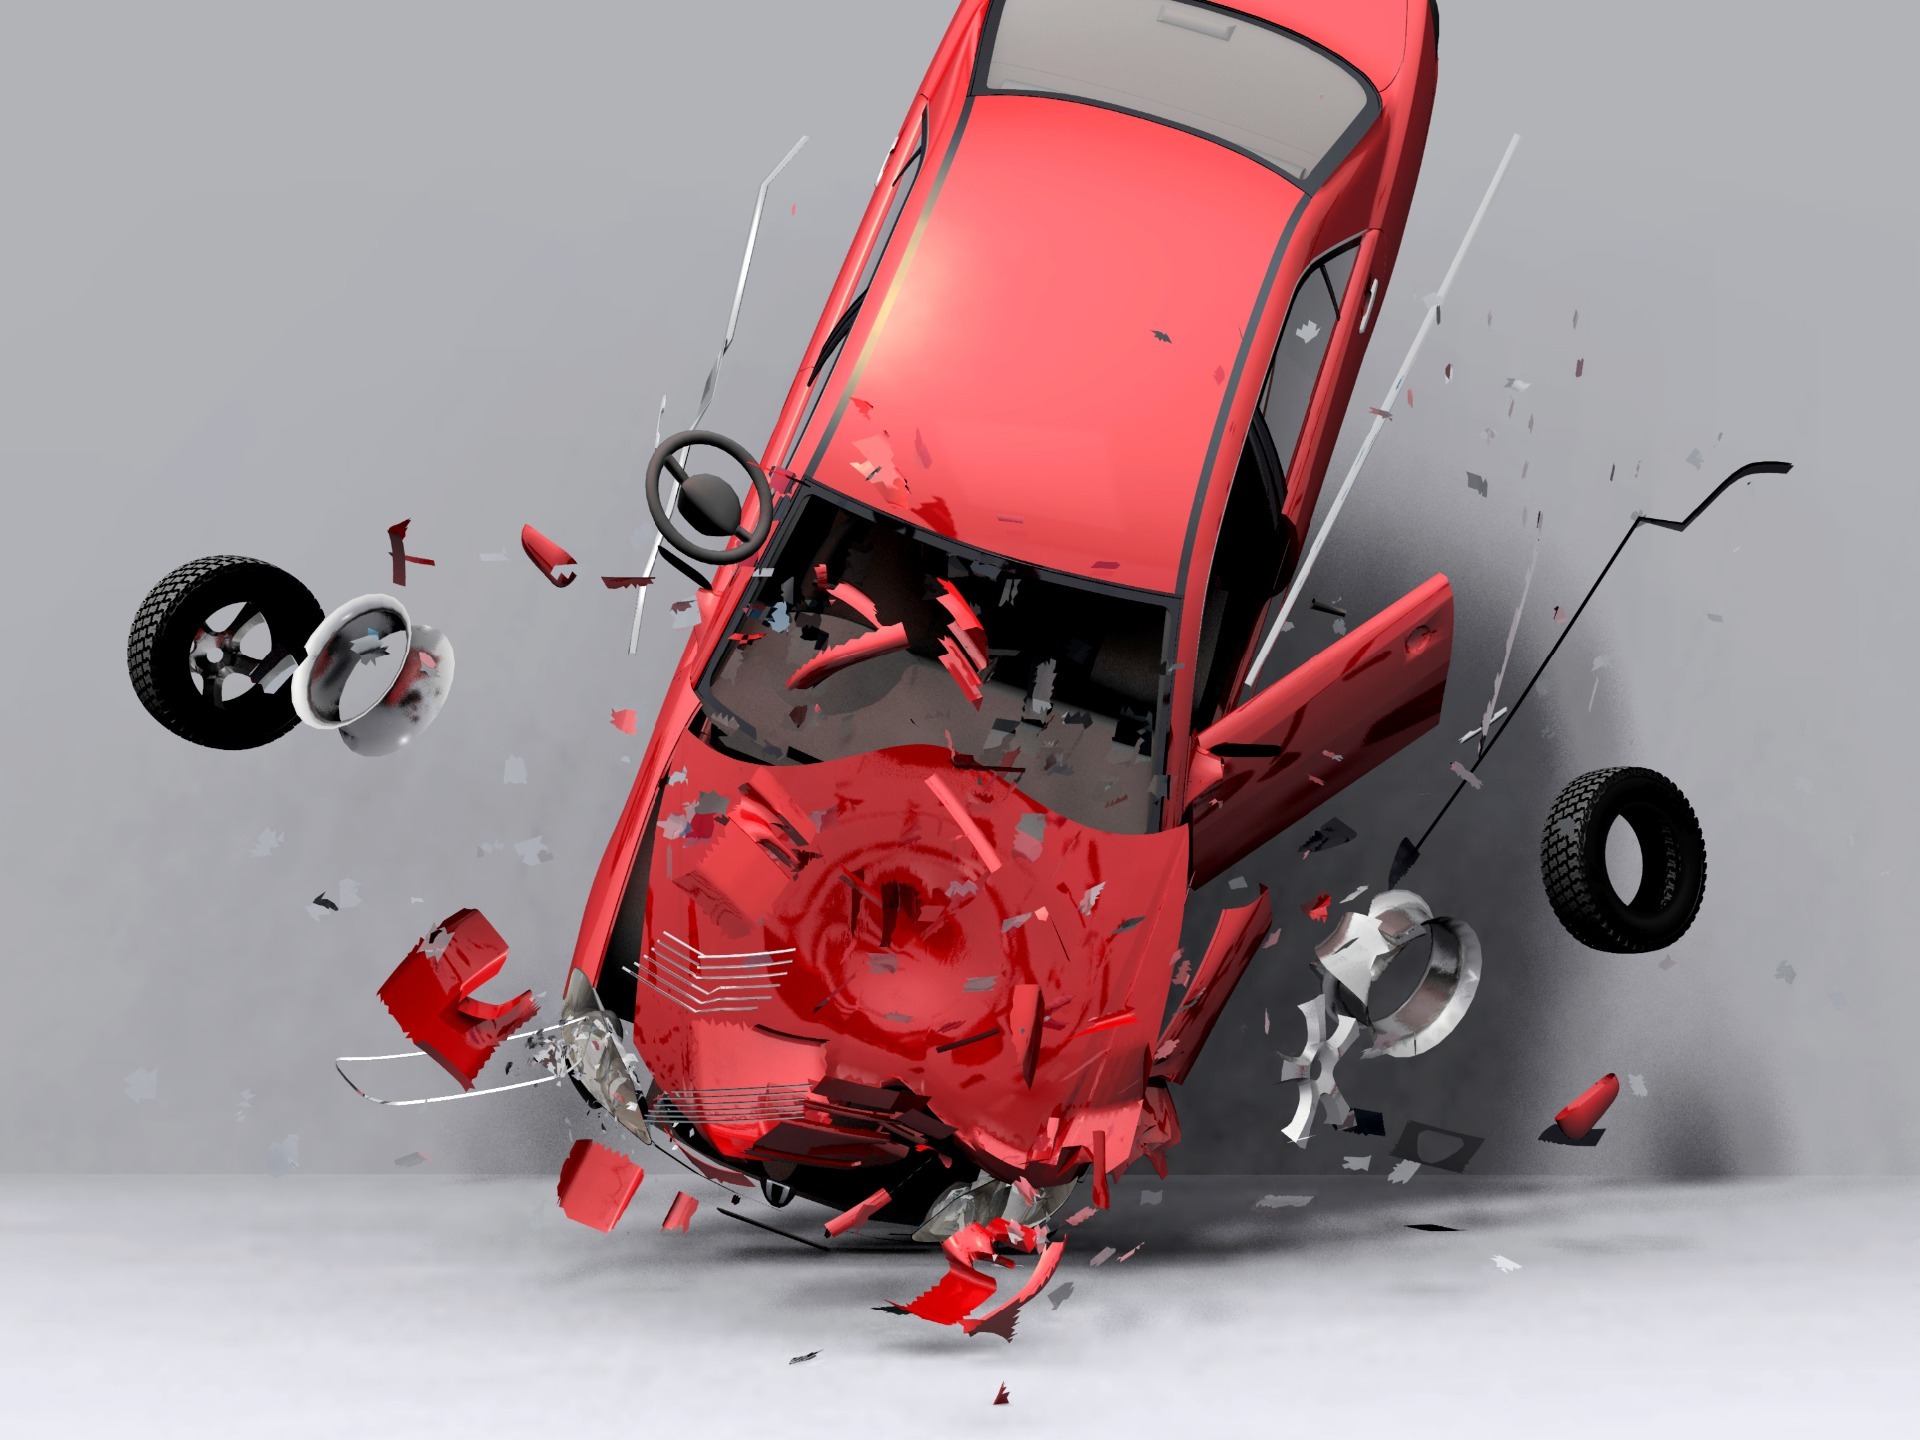 A car which has landed on it's front, with doors open, and damaged exterior; our no win no fee solicitors can assist with a compensation claim if you've been injured in a serious car accident.